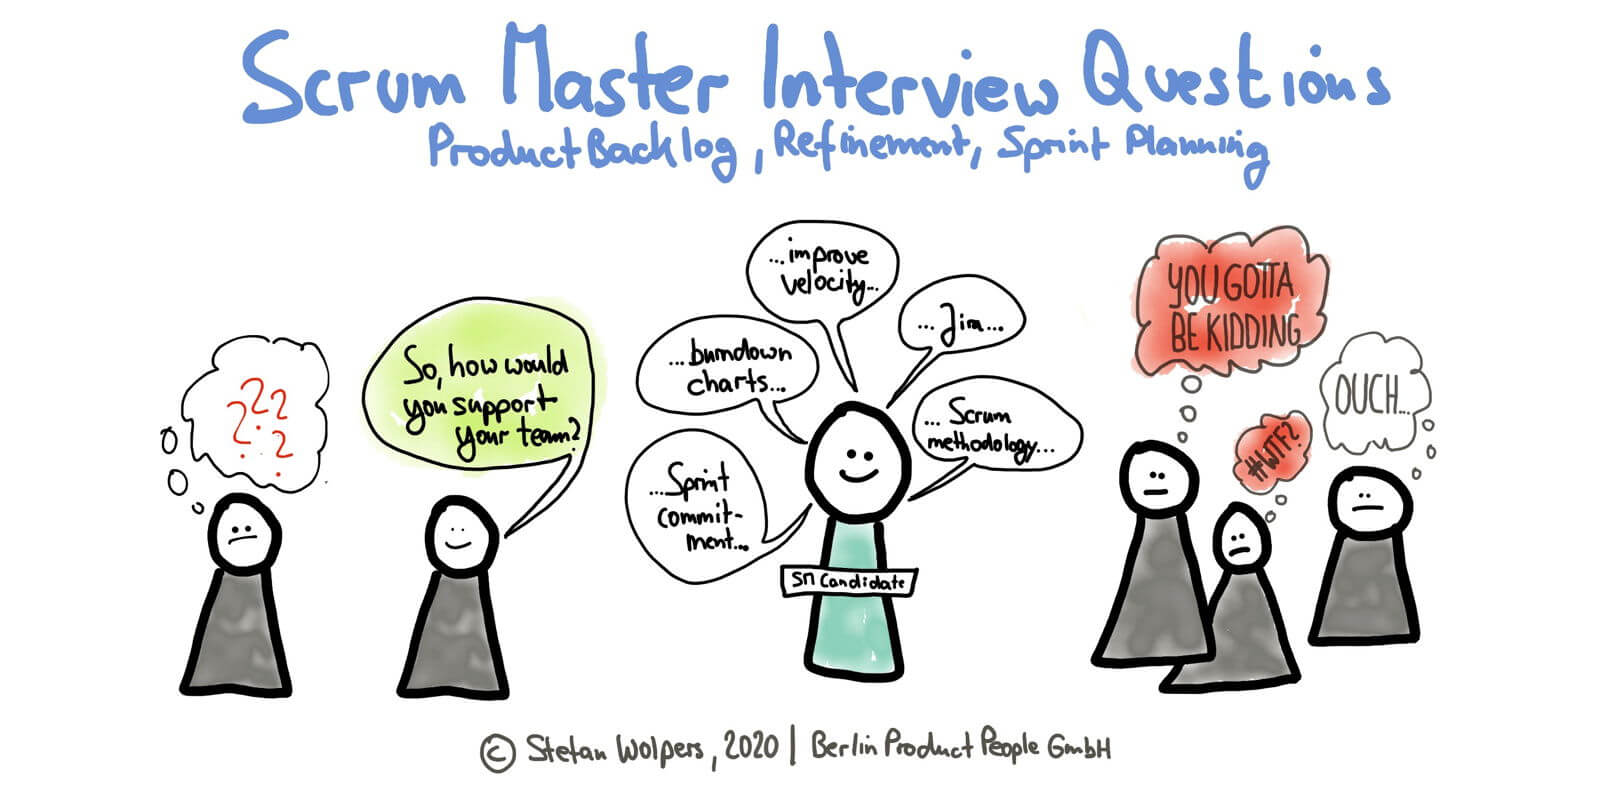 Scrum Master Interview Questions: Product Backlog, Sprint Planning, Backlog Refinement — Age-of-Product.com